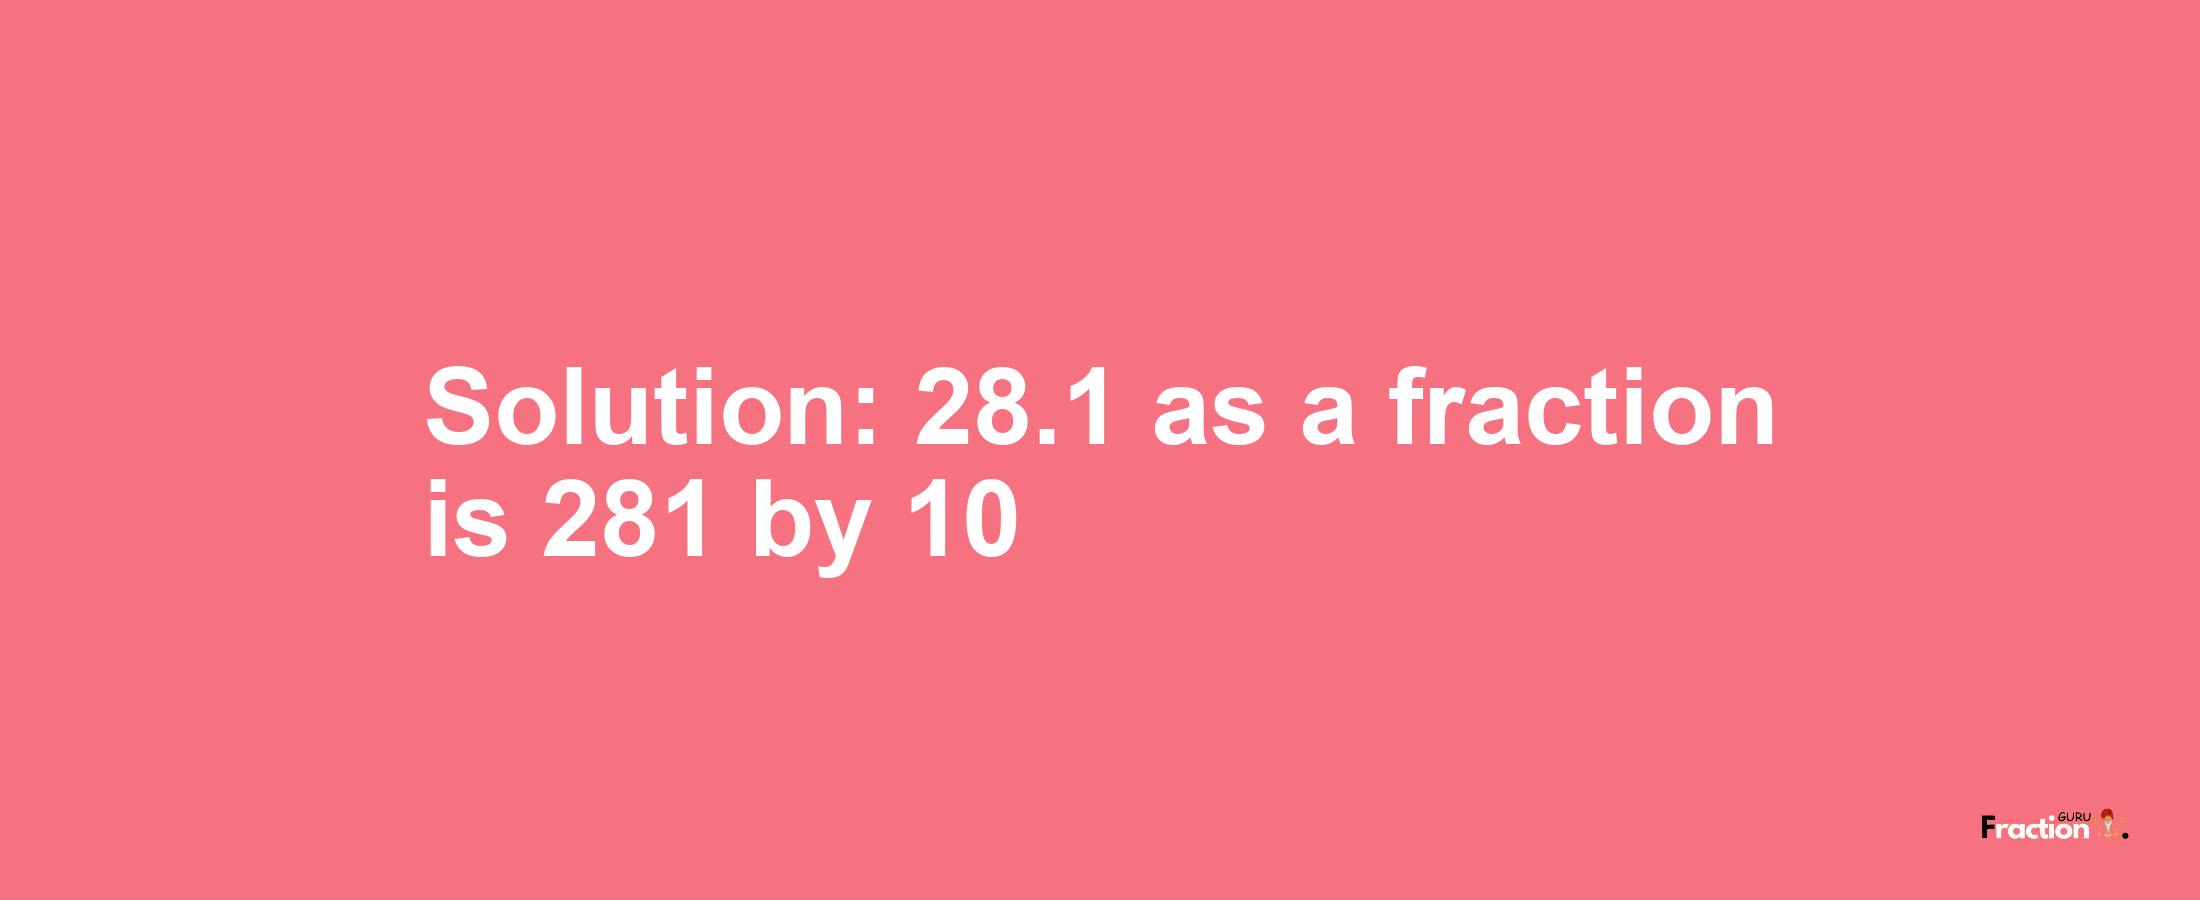 Solution:28.1 as a fraction is 281/10